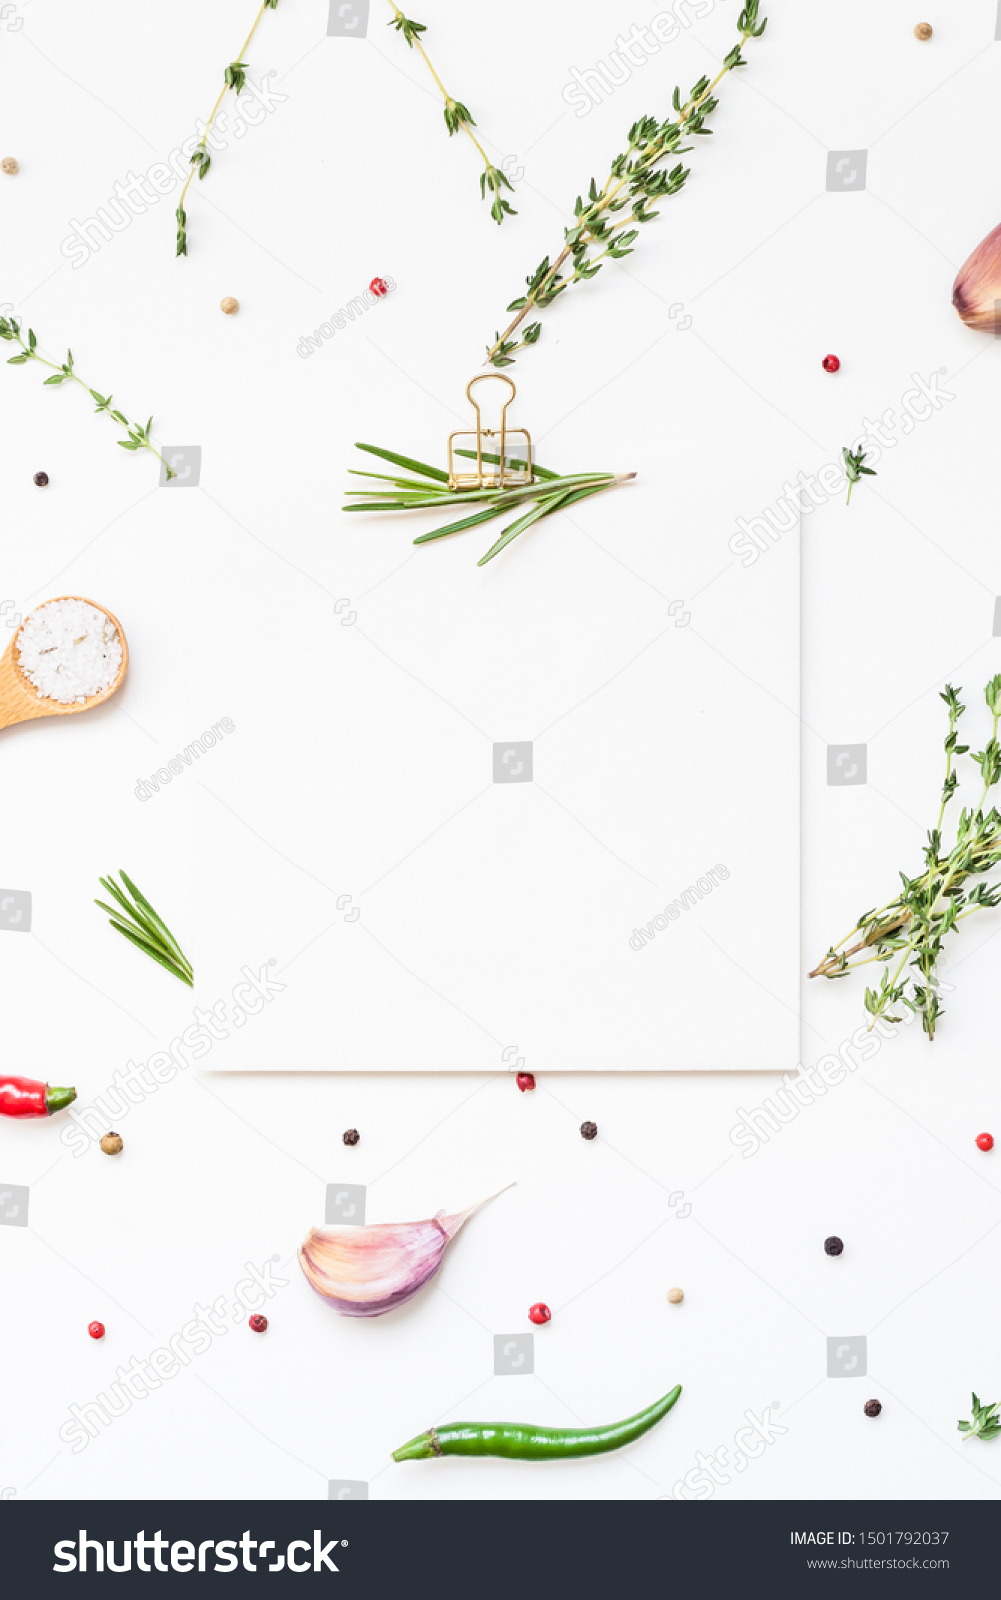 Download Flat Lay Overhead View Blank Recipe Stock Photo Edit Now 1501792037